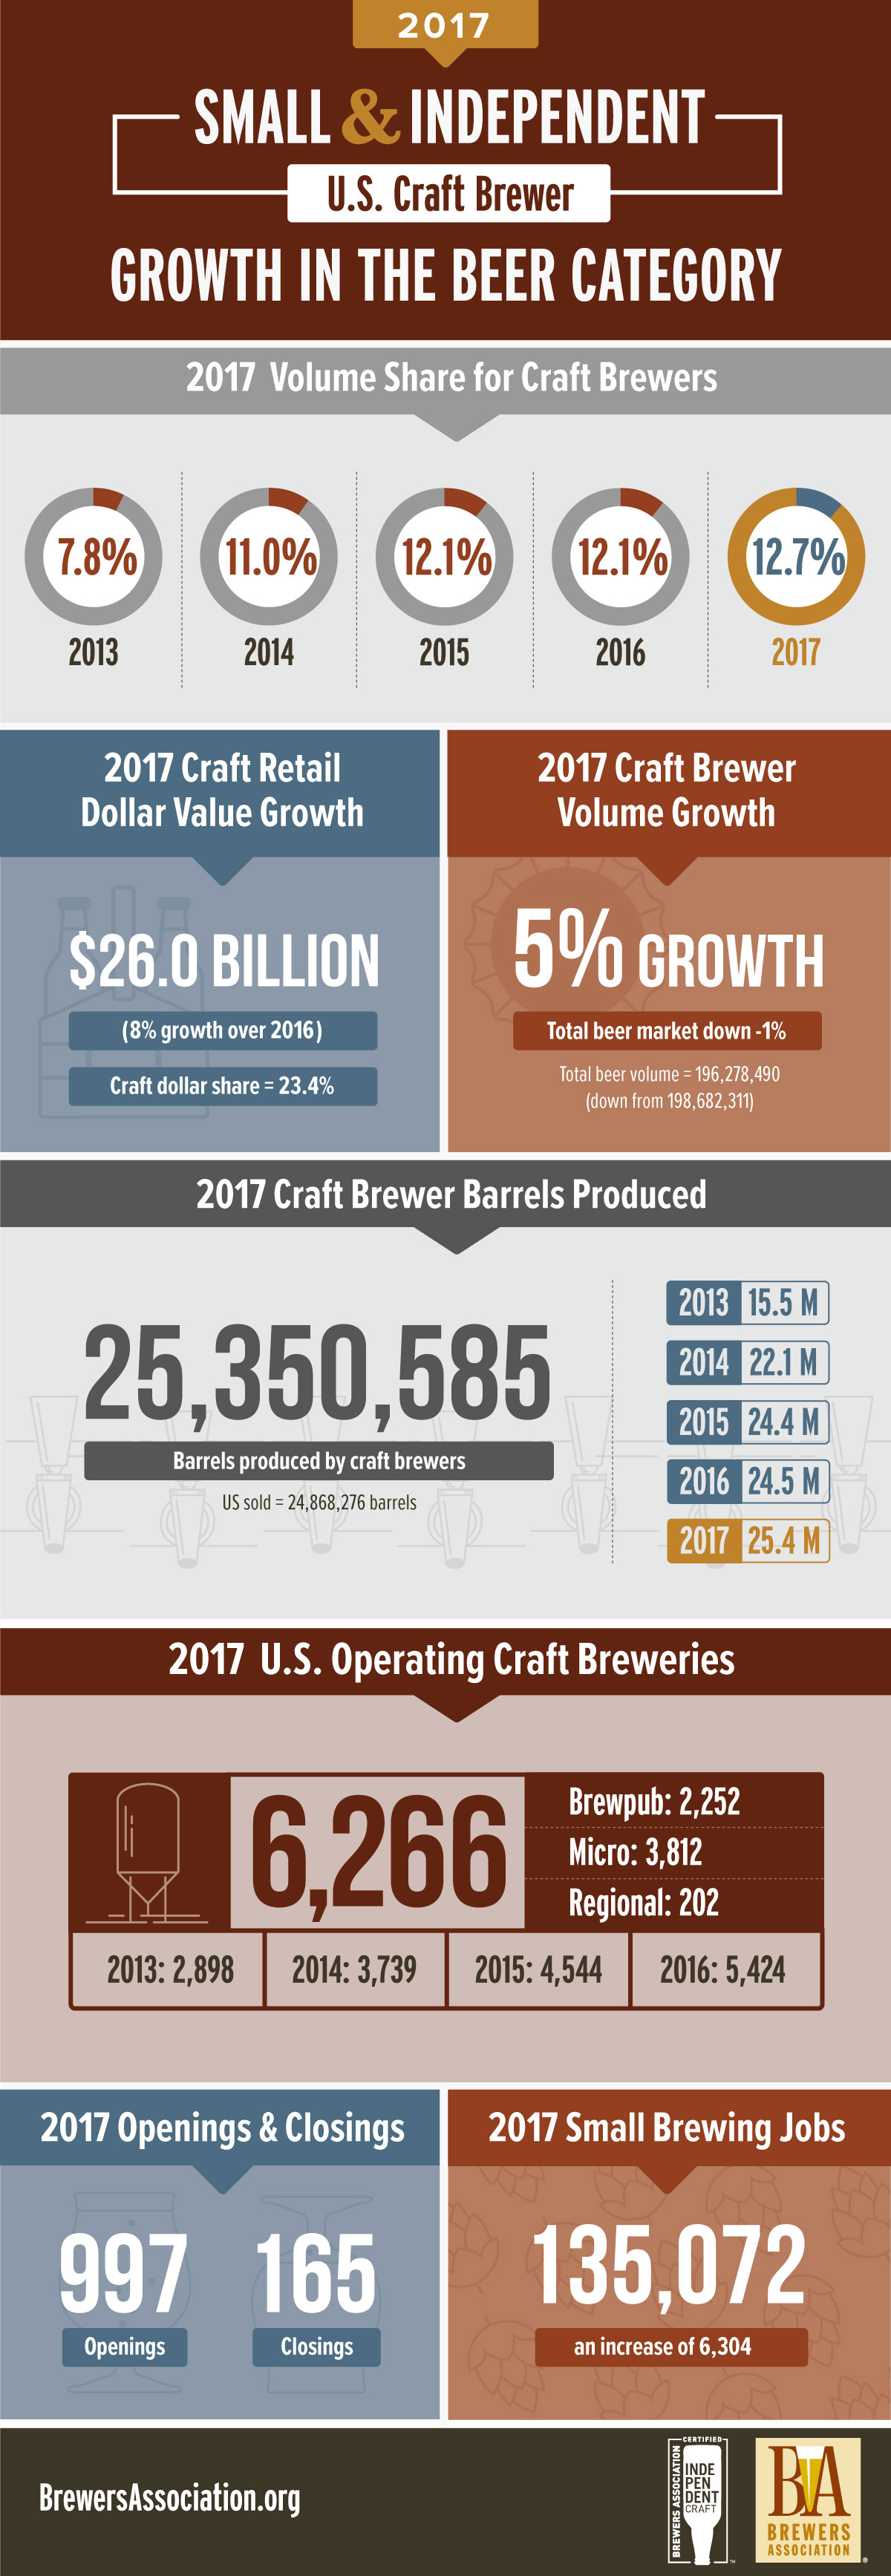 2017_BA_growth-infographic